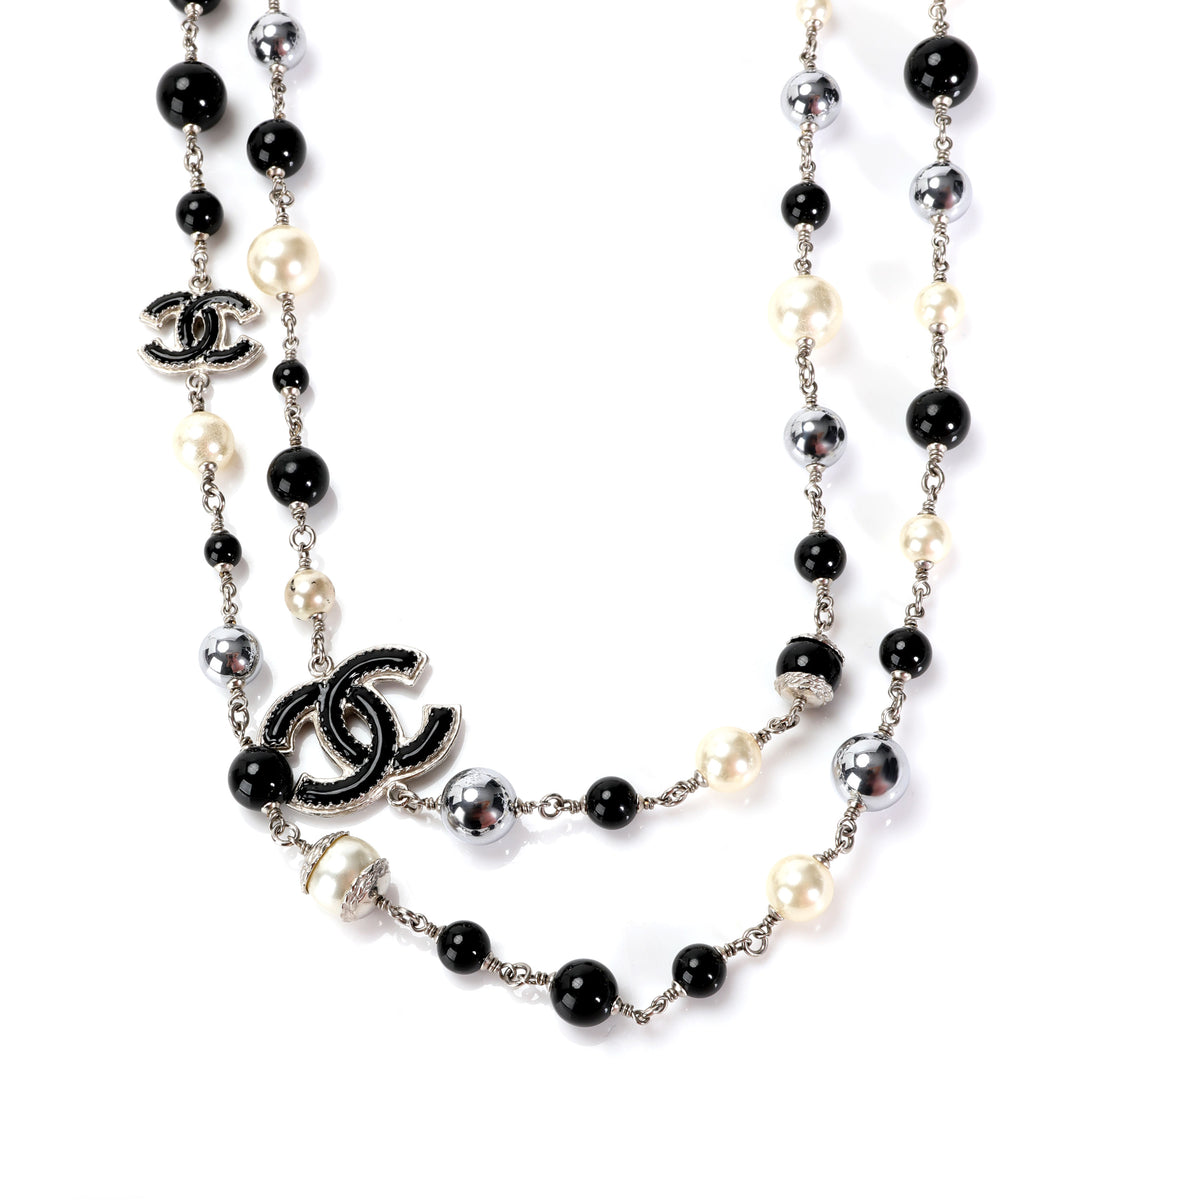 Proantic Chanel Paris Long Necklace Glass Beads And Crystal